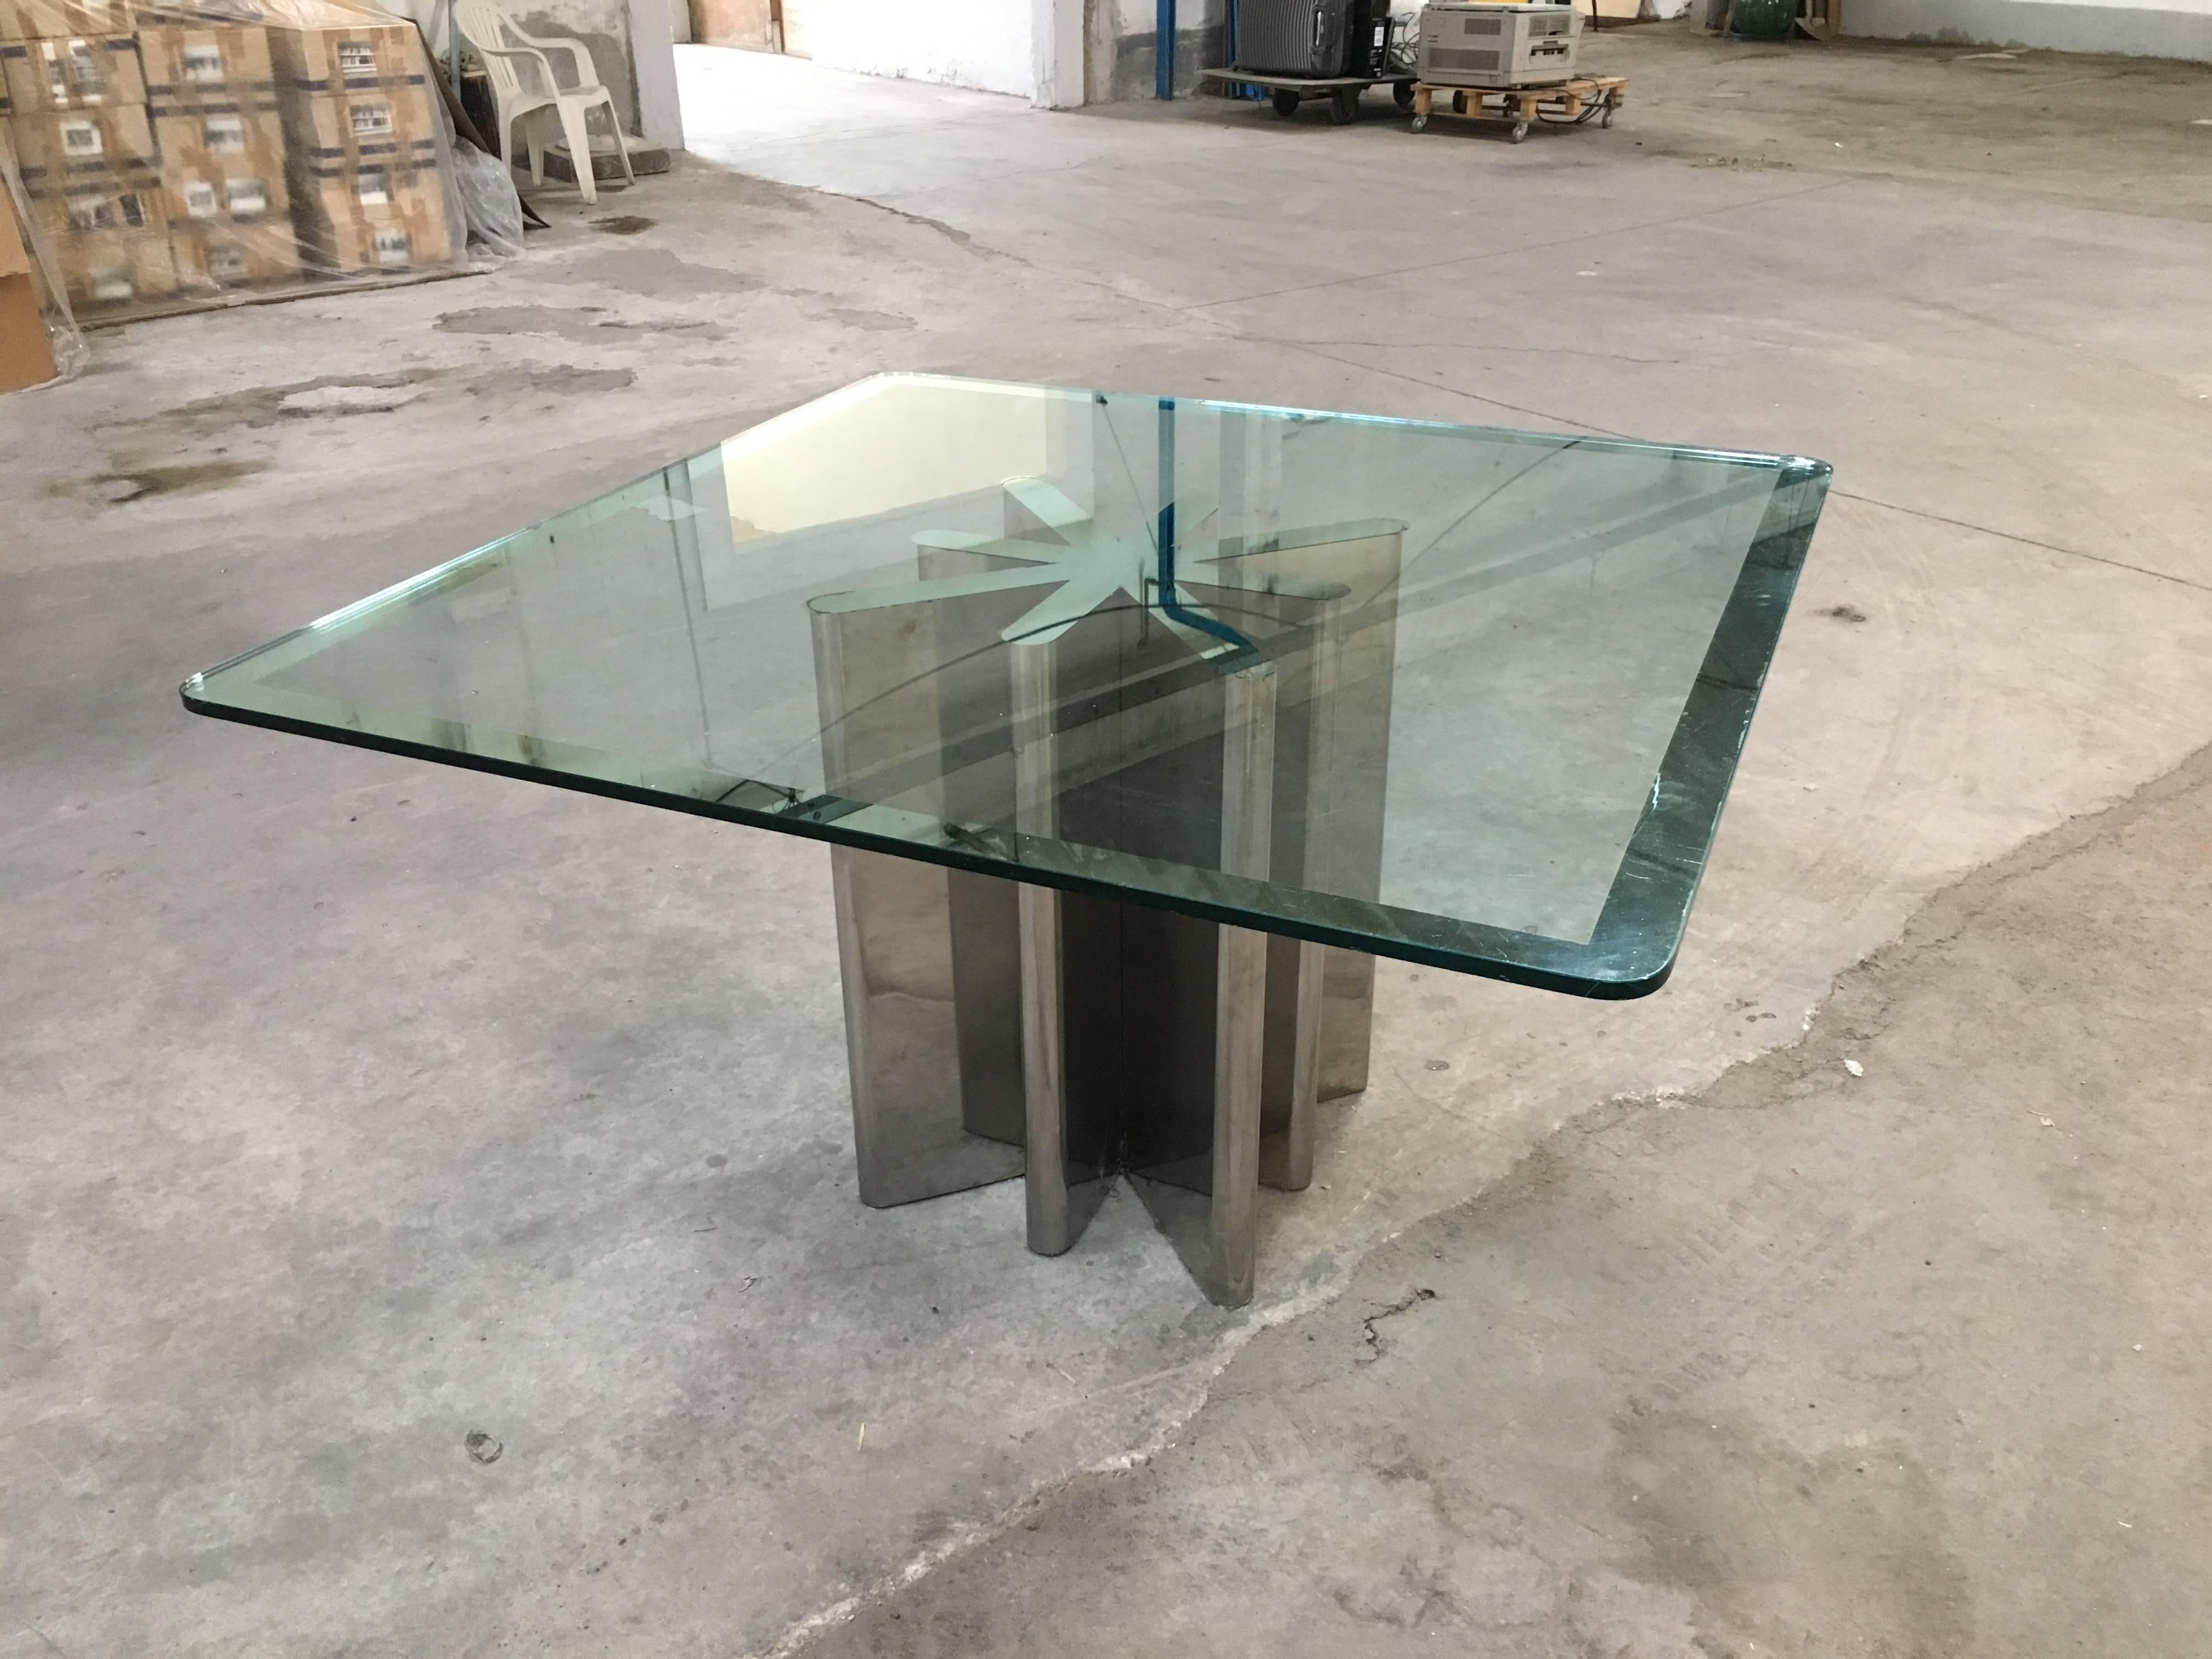 Late 20th Century Italian Table with Chrome Base and Silver Framed Glass Top from 1970s